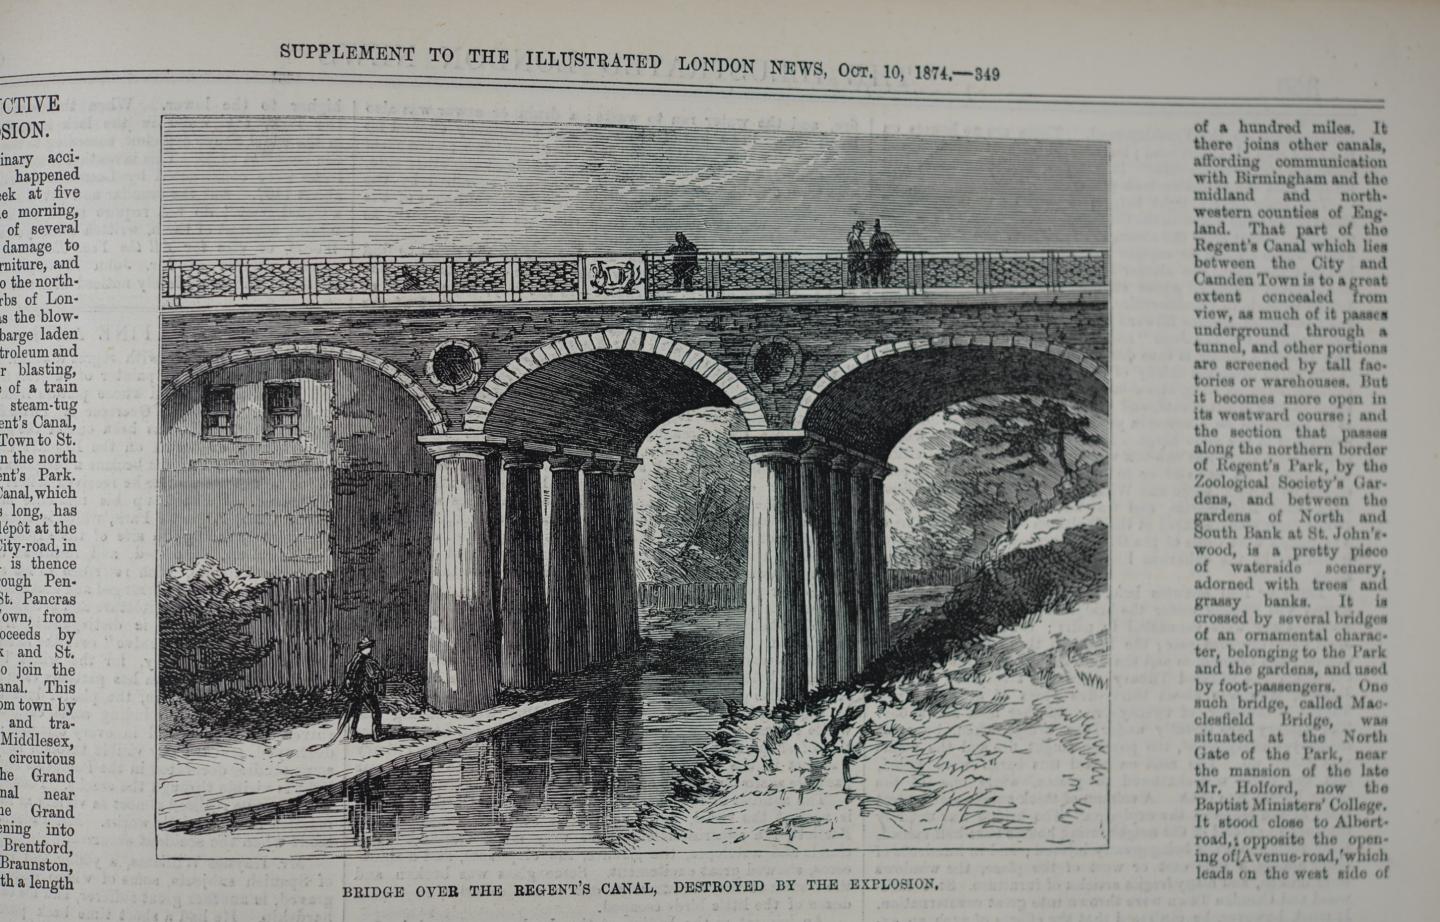 Illustrated London News Oct 10 1874_cropped2